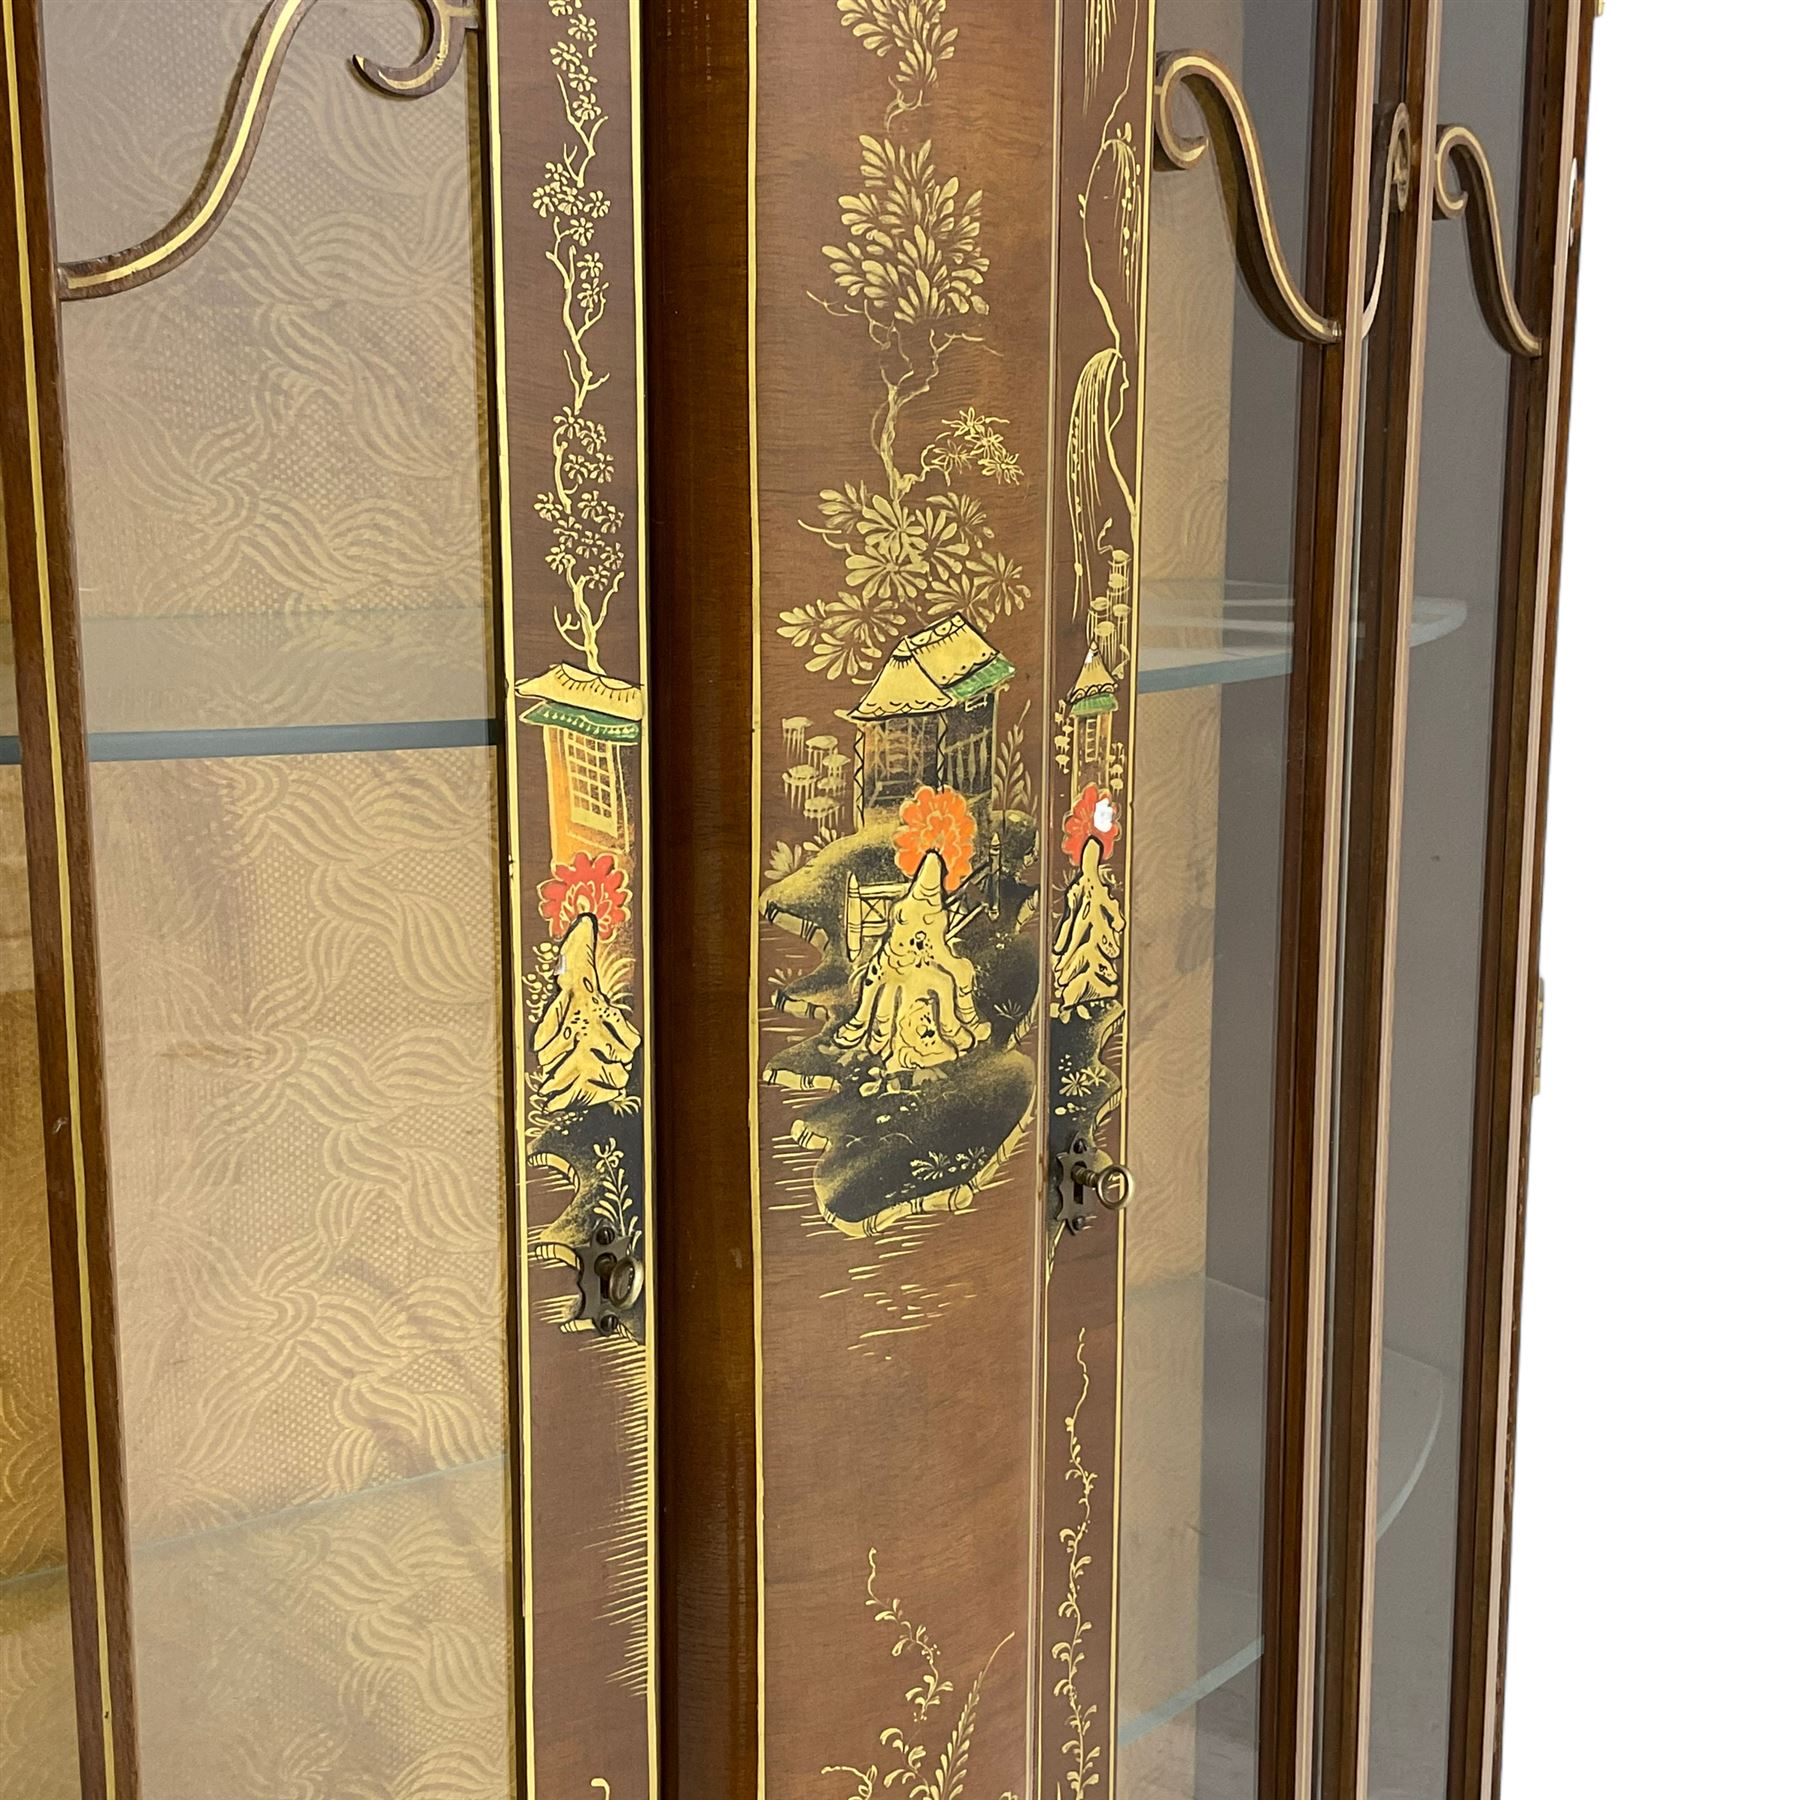 Early 20th century walnut display cabinet with Chinoiserie decoration - Image 6 of 7